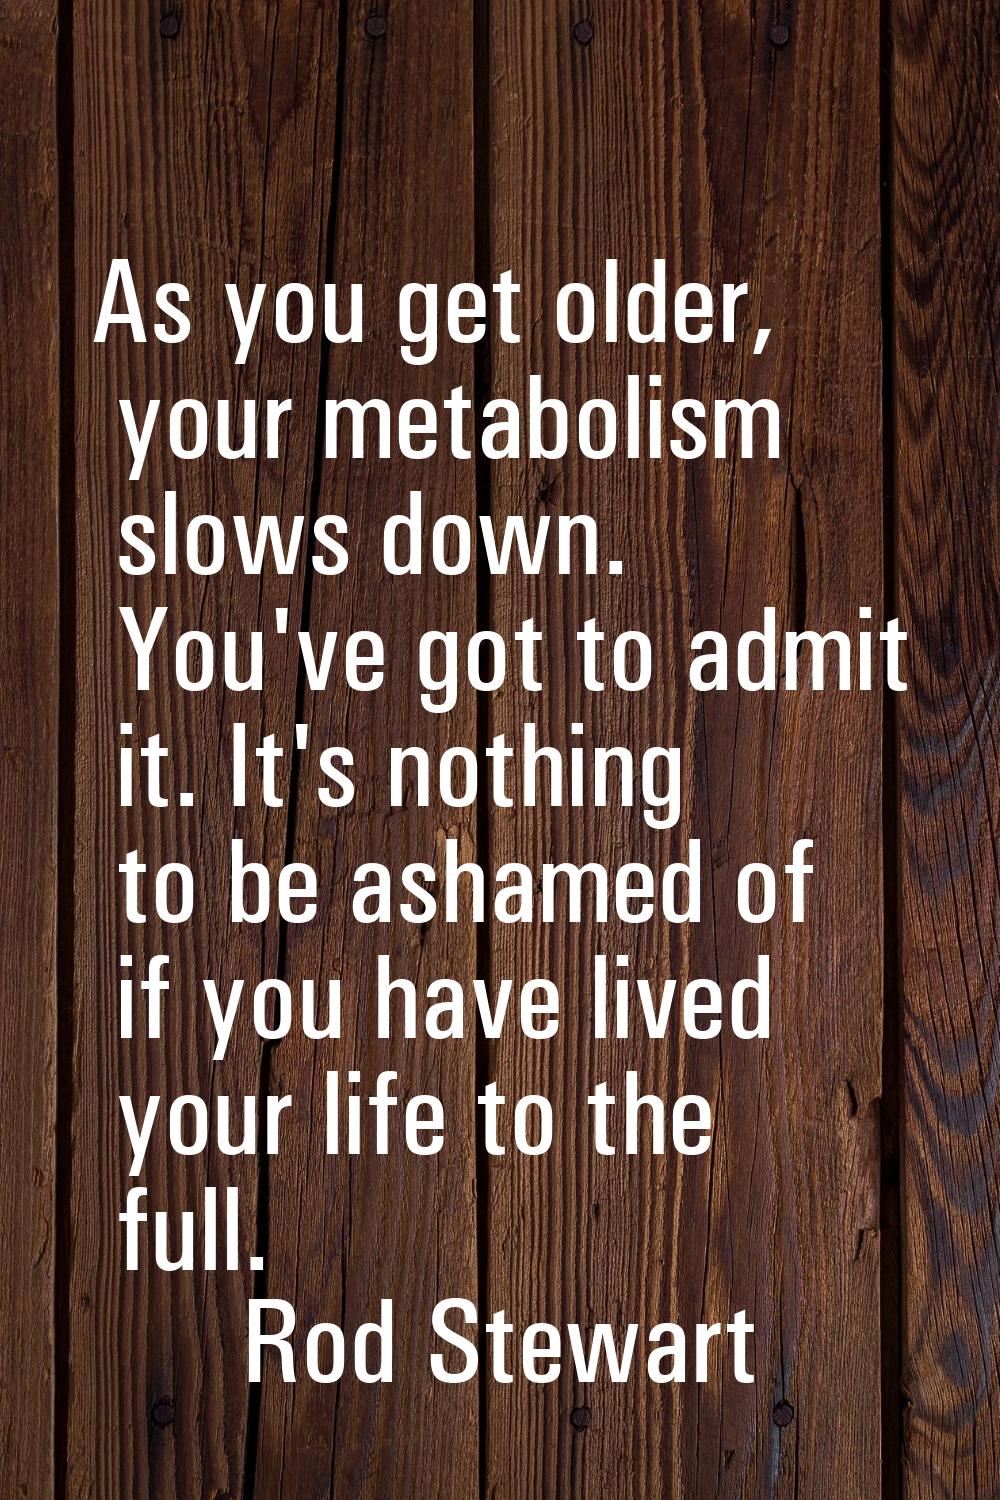 As you get older, your metabolism slows down. You've got to admit it. It's nothing to be ashamed of